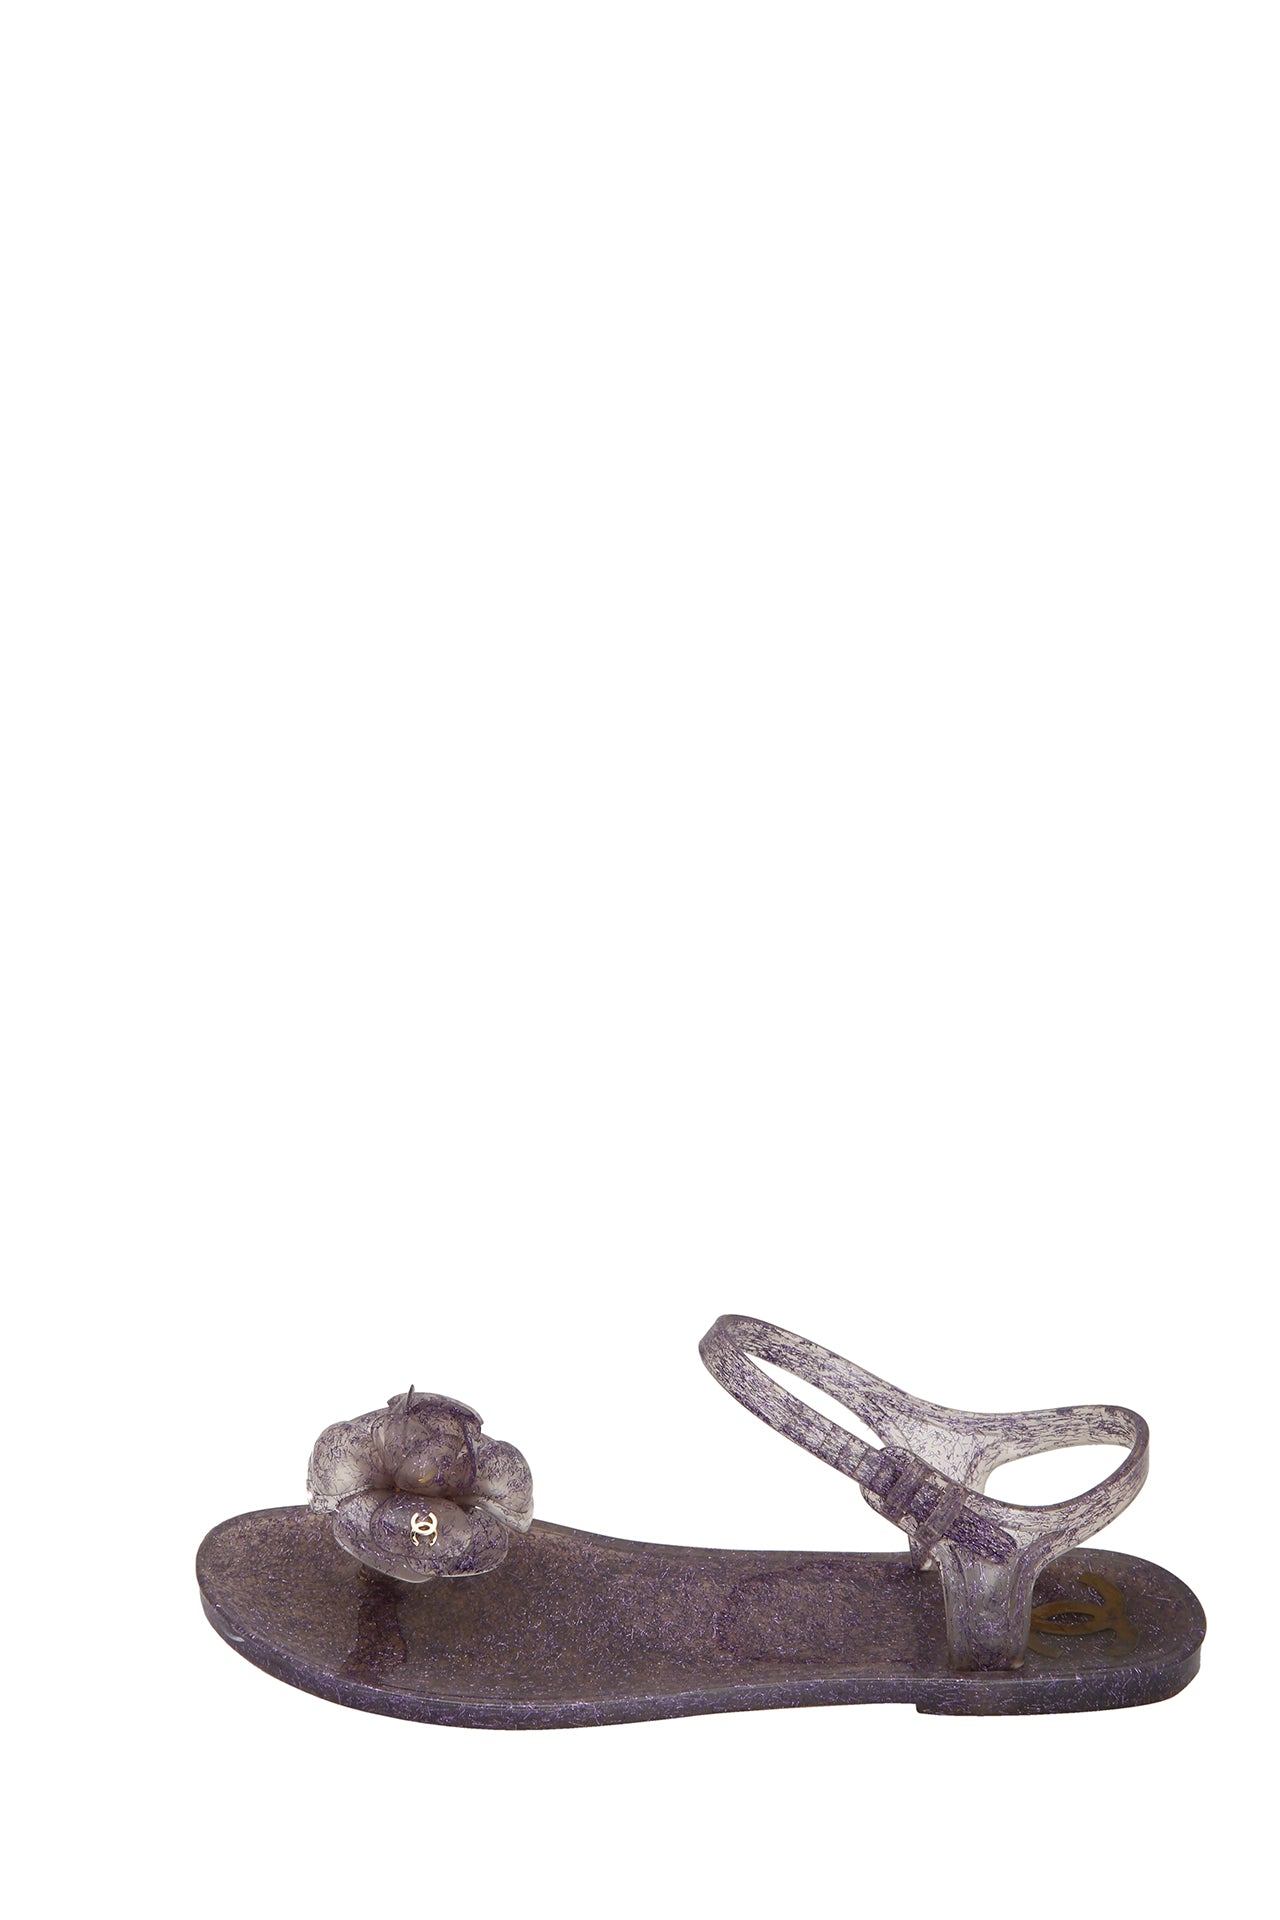 Chanel Glitter Jelly Camellia Ankle Strap Thong Flat Sandals Lavender